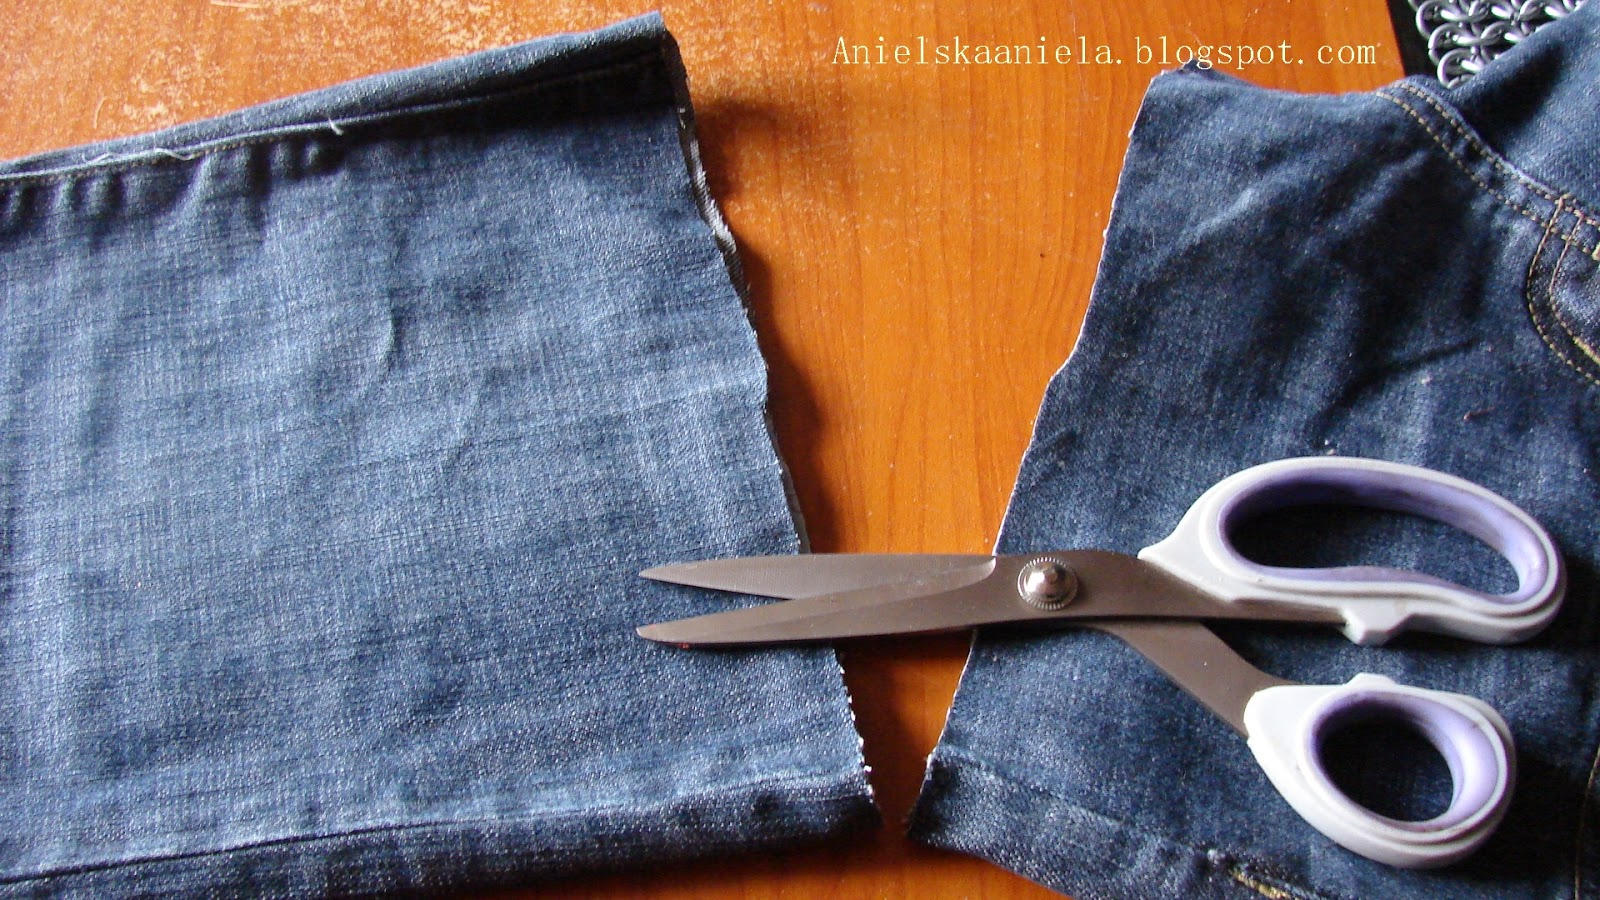 AnielskaAniela: A Blog for Sewing Lovers and DIY Enthusiasts